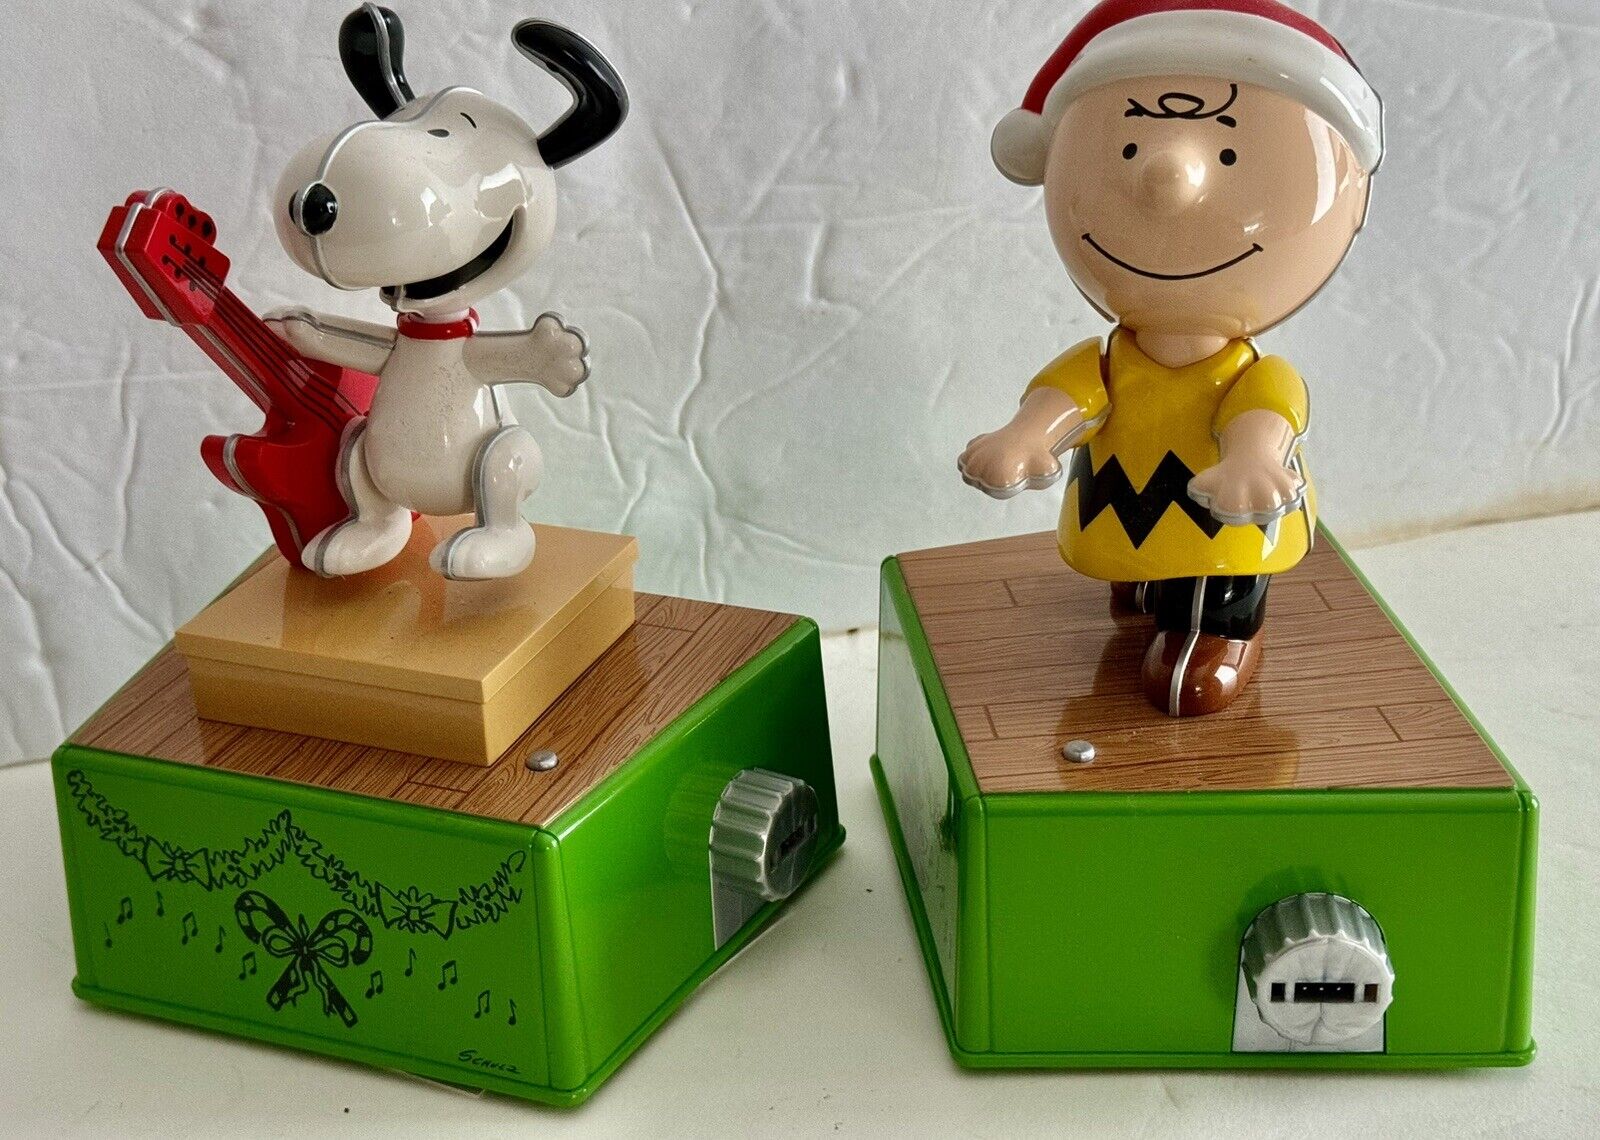 2017 Hallmark Dance Party Spectacle Musical Snoopy & Charlie Brown Peanuts Works